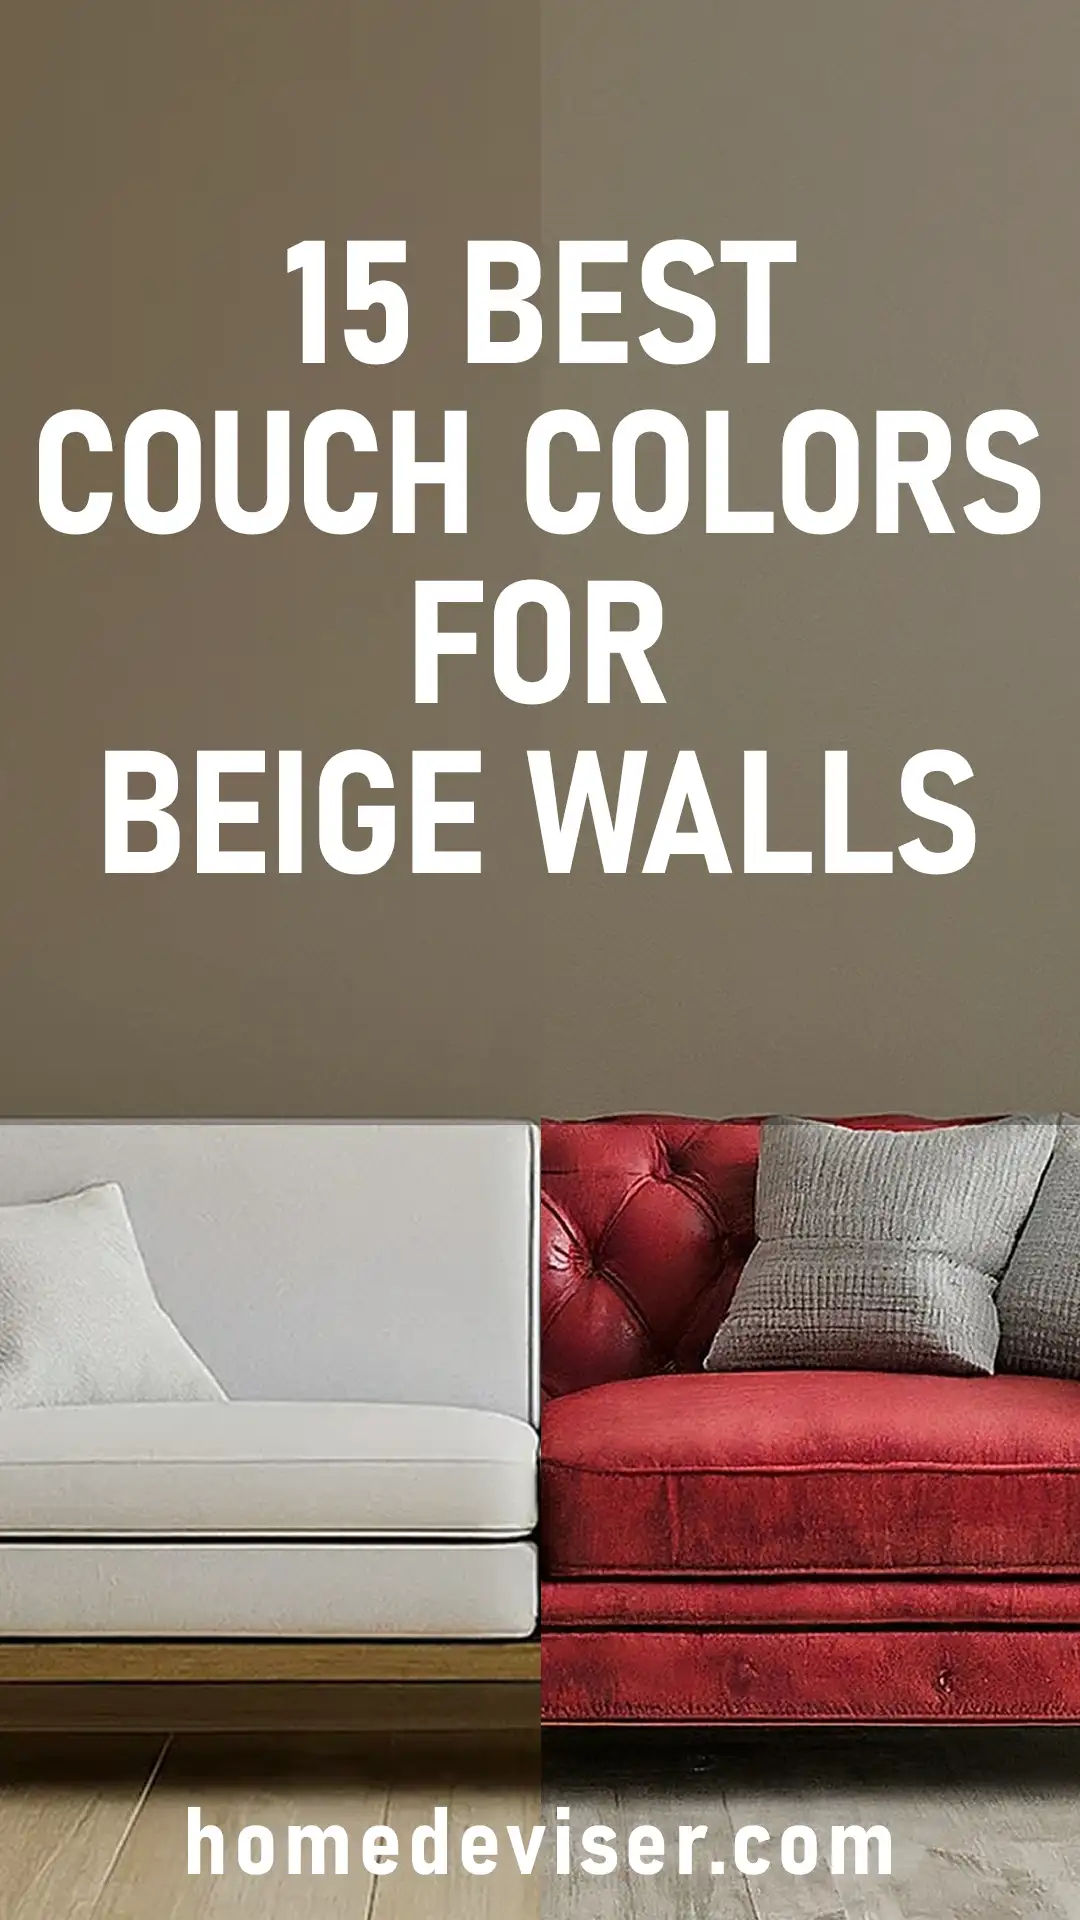 Best Couch Colors for Beige Walls